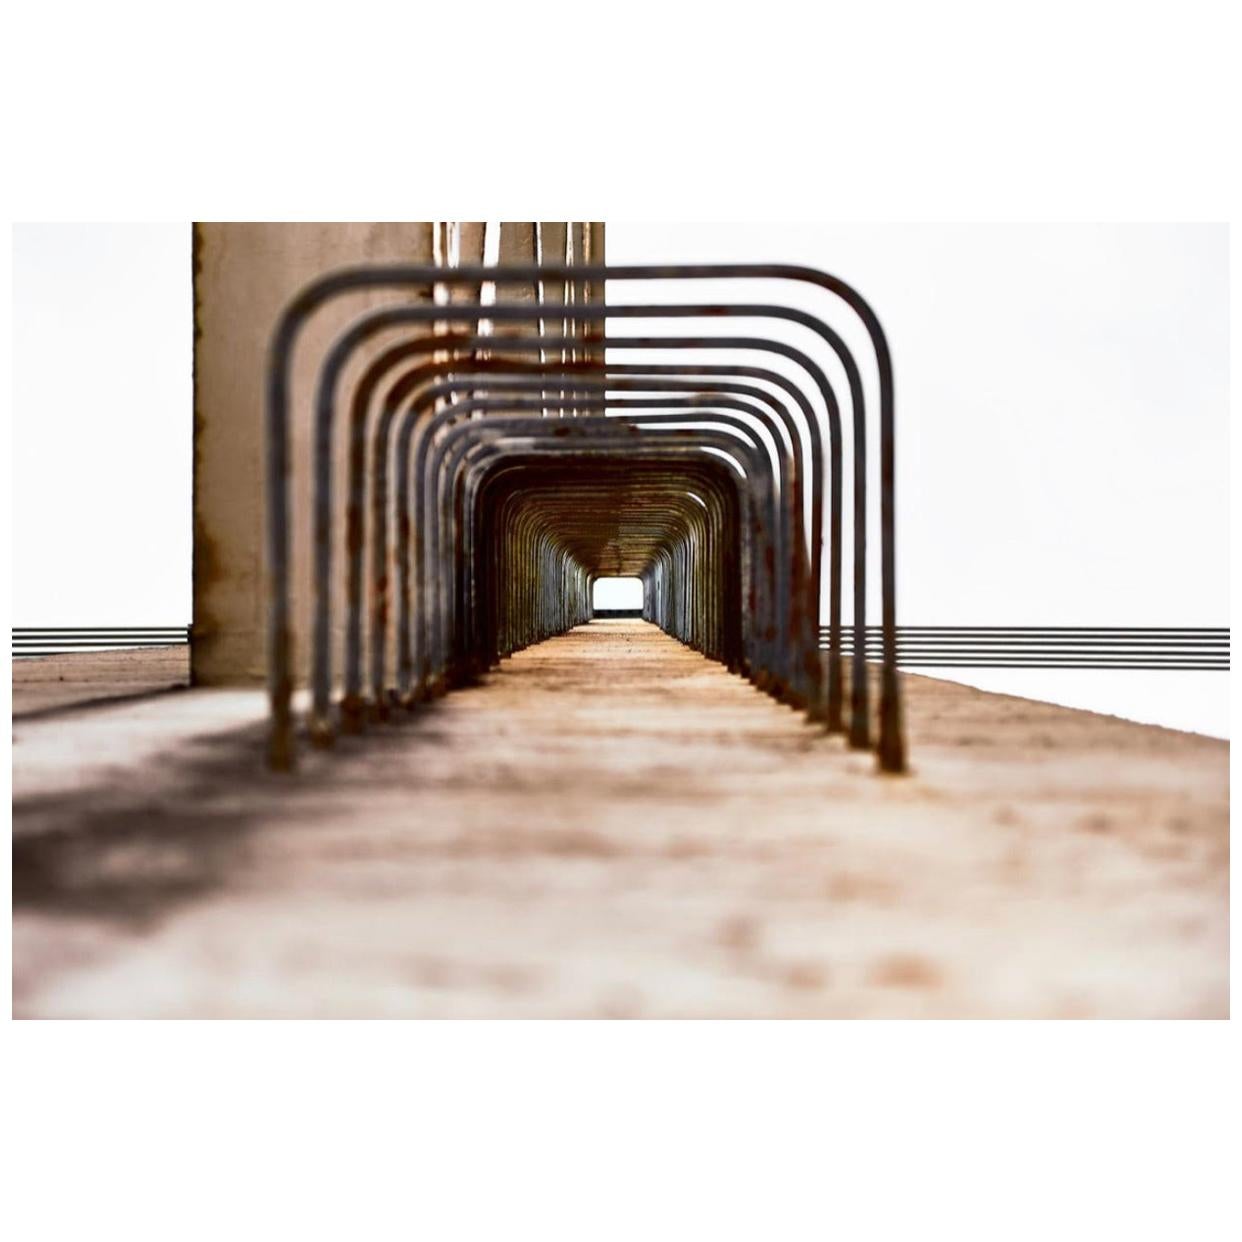 “Tunnel of Steps” Limited Edition Photograph by Cuco de Frutos For Sale